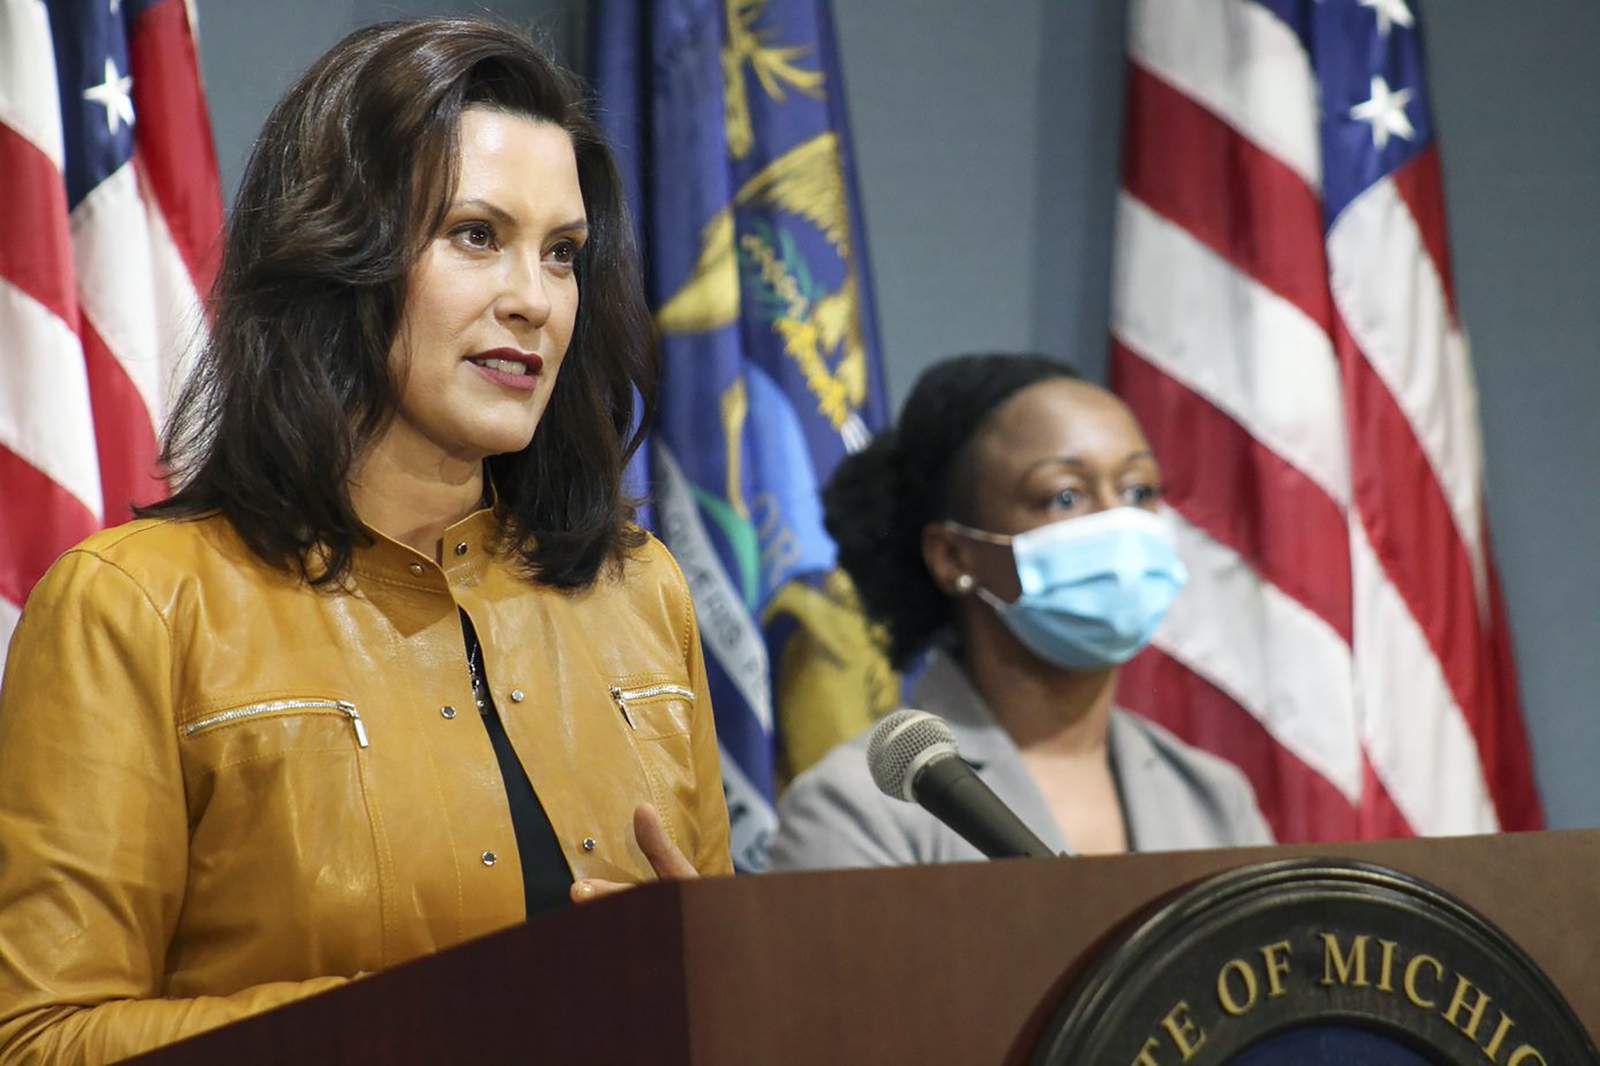 Michigan Gov. Gretchen Whitmer to outline next steps for schools to reopen this fall